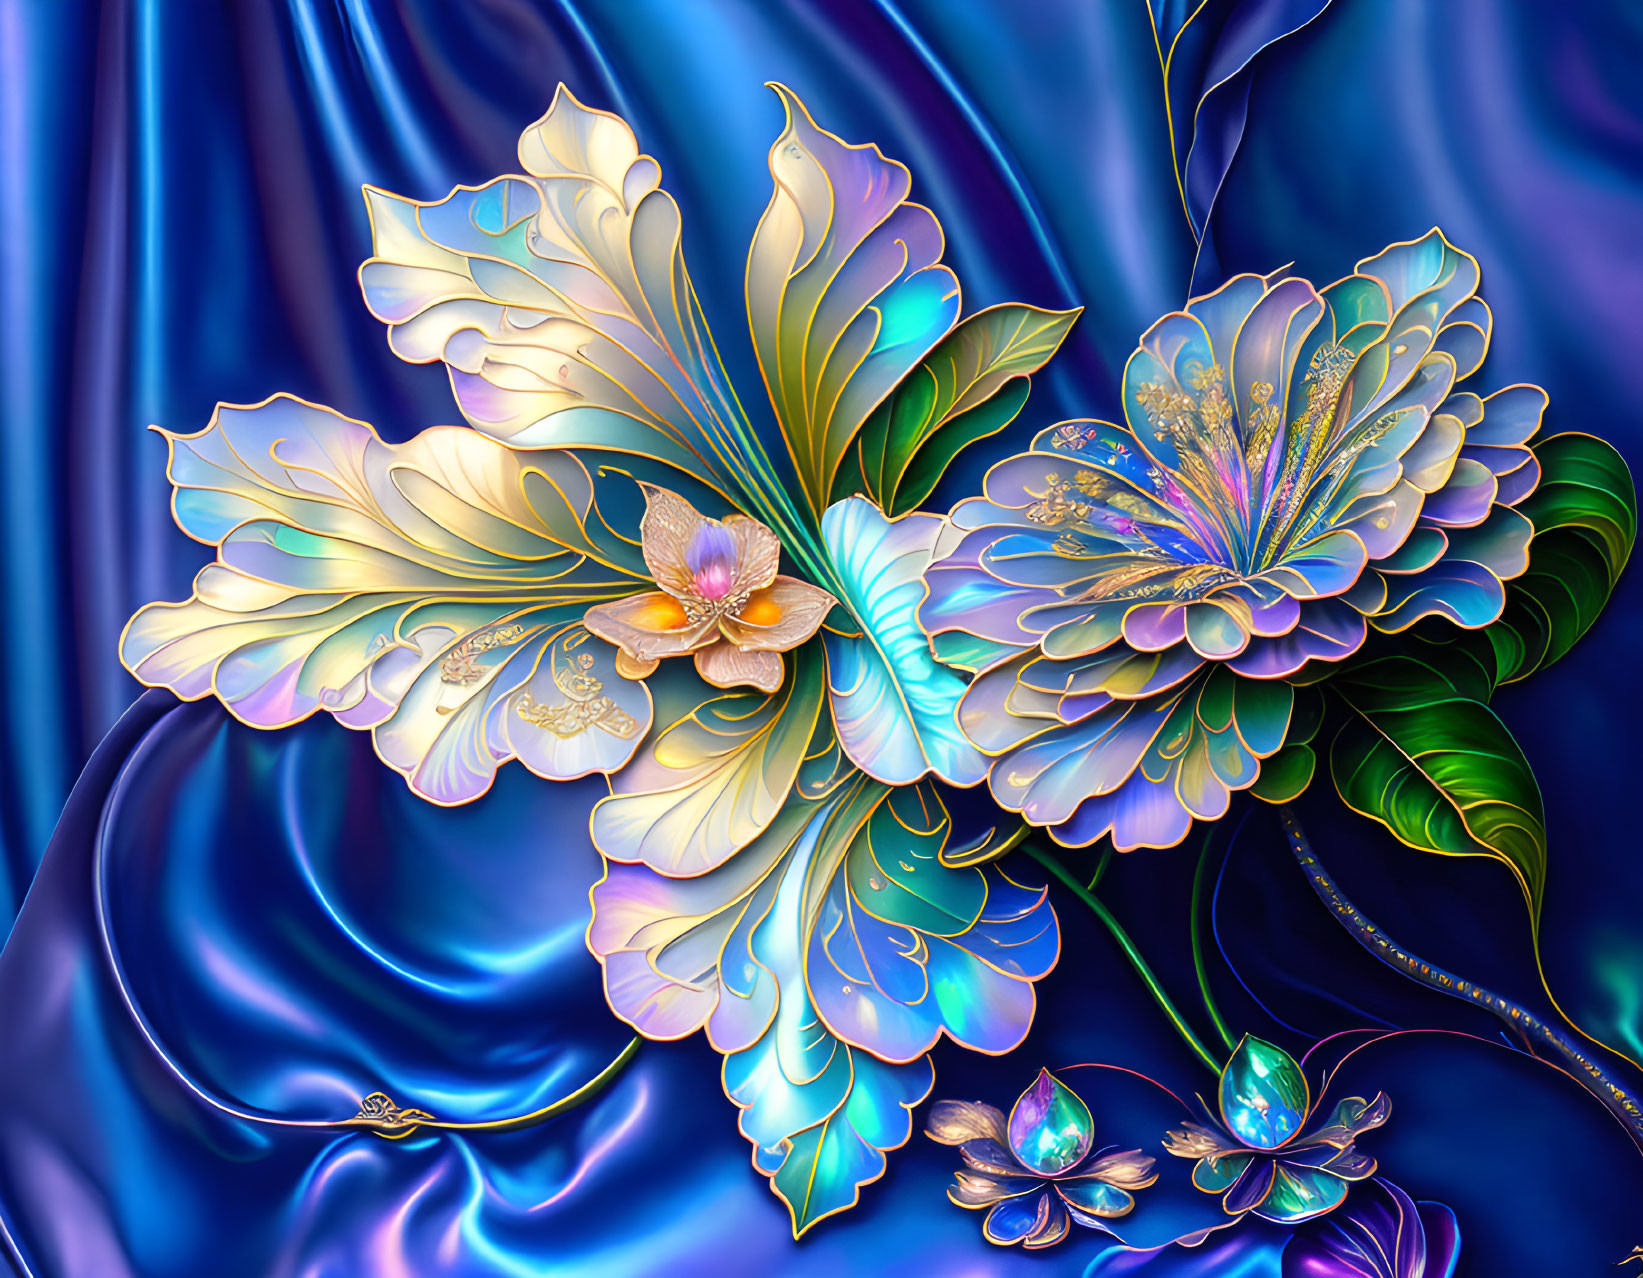 Luminous digital art: intricate flowers on blue satin with dewdrops